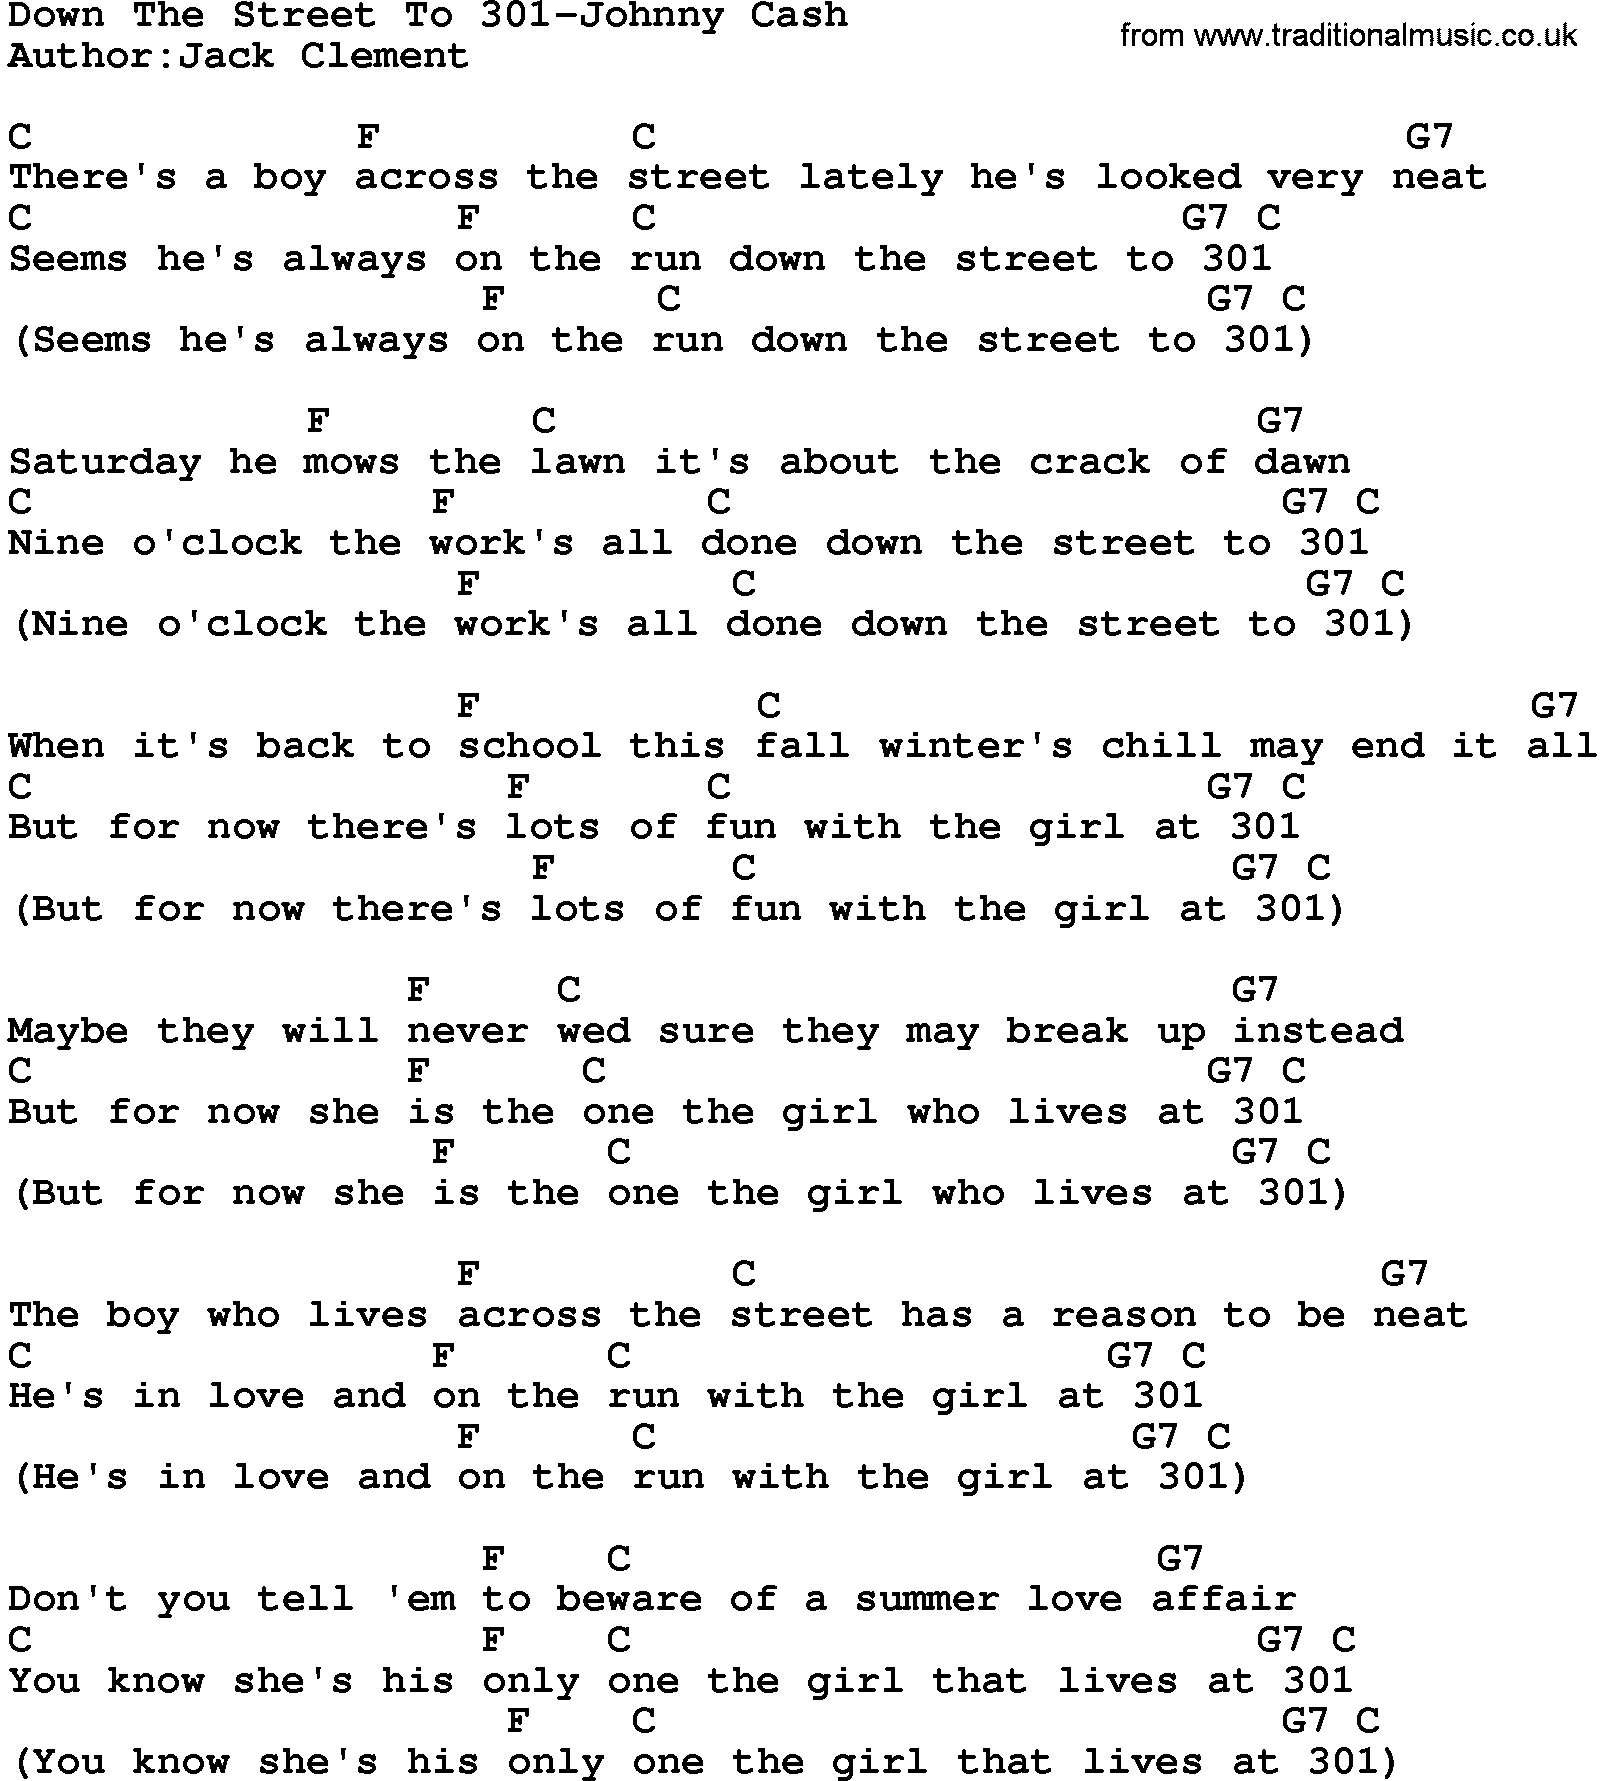 Country music song: Down The Street To 301-Johnny Cash lyrics and chords